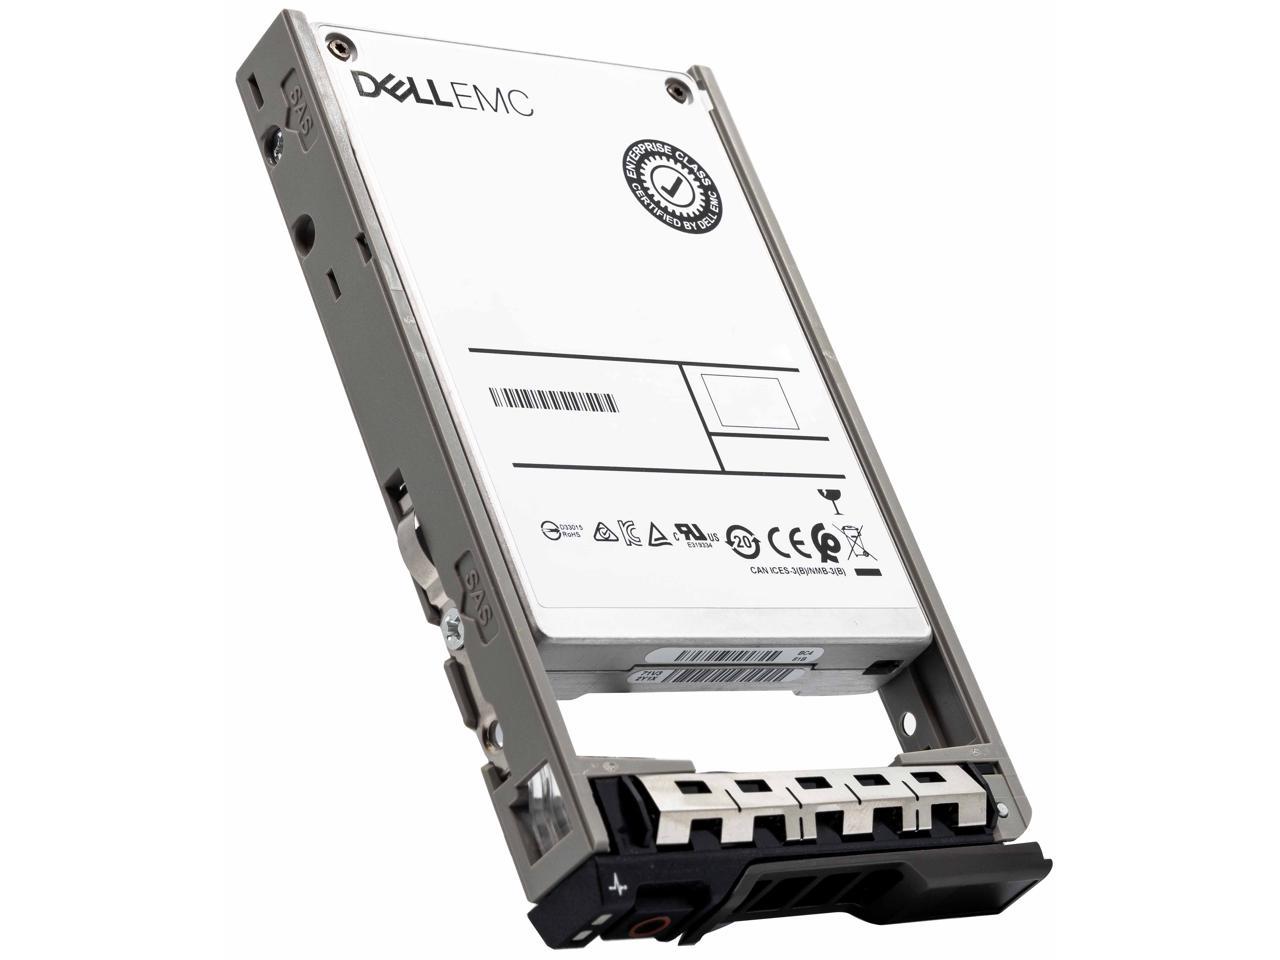 Dell G13 VN8N8 800GB SAS 12Gb/s 2.5" Solid State Drive